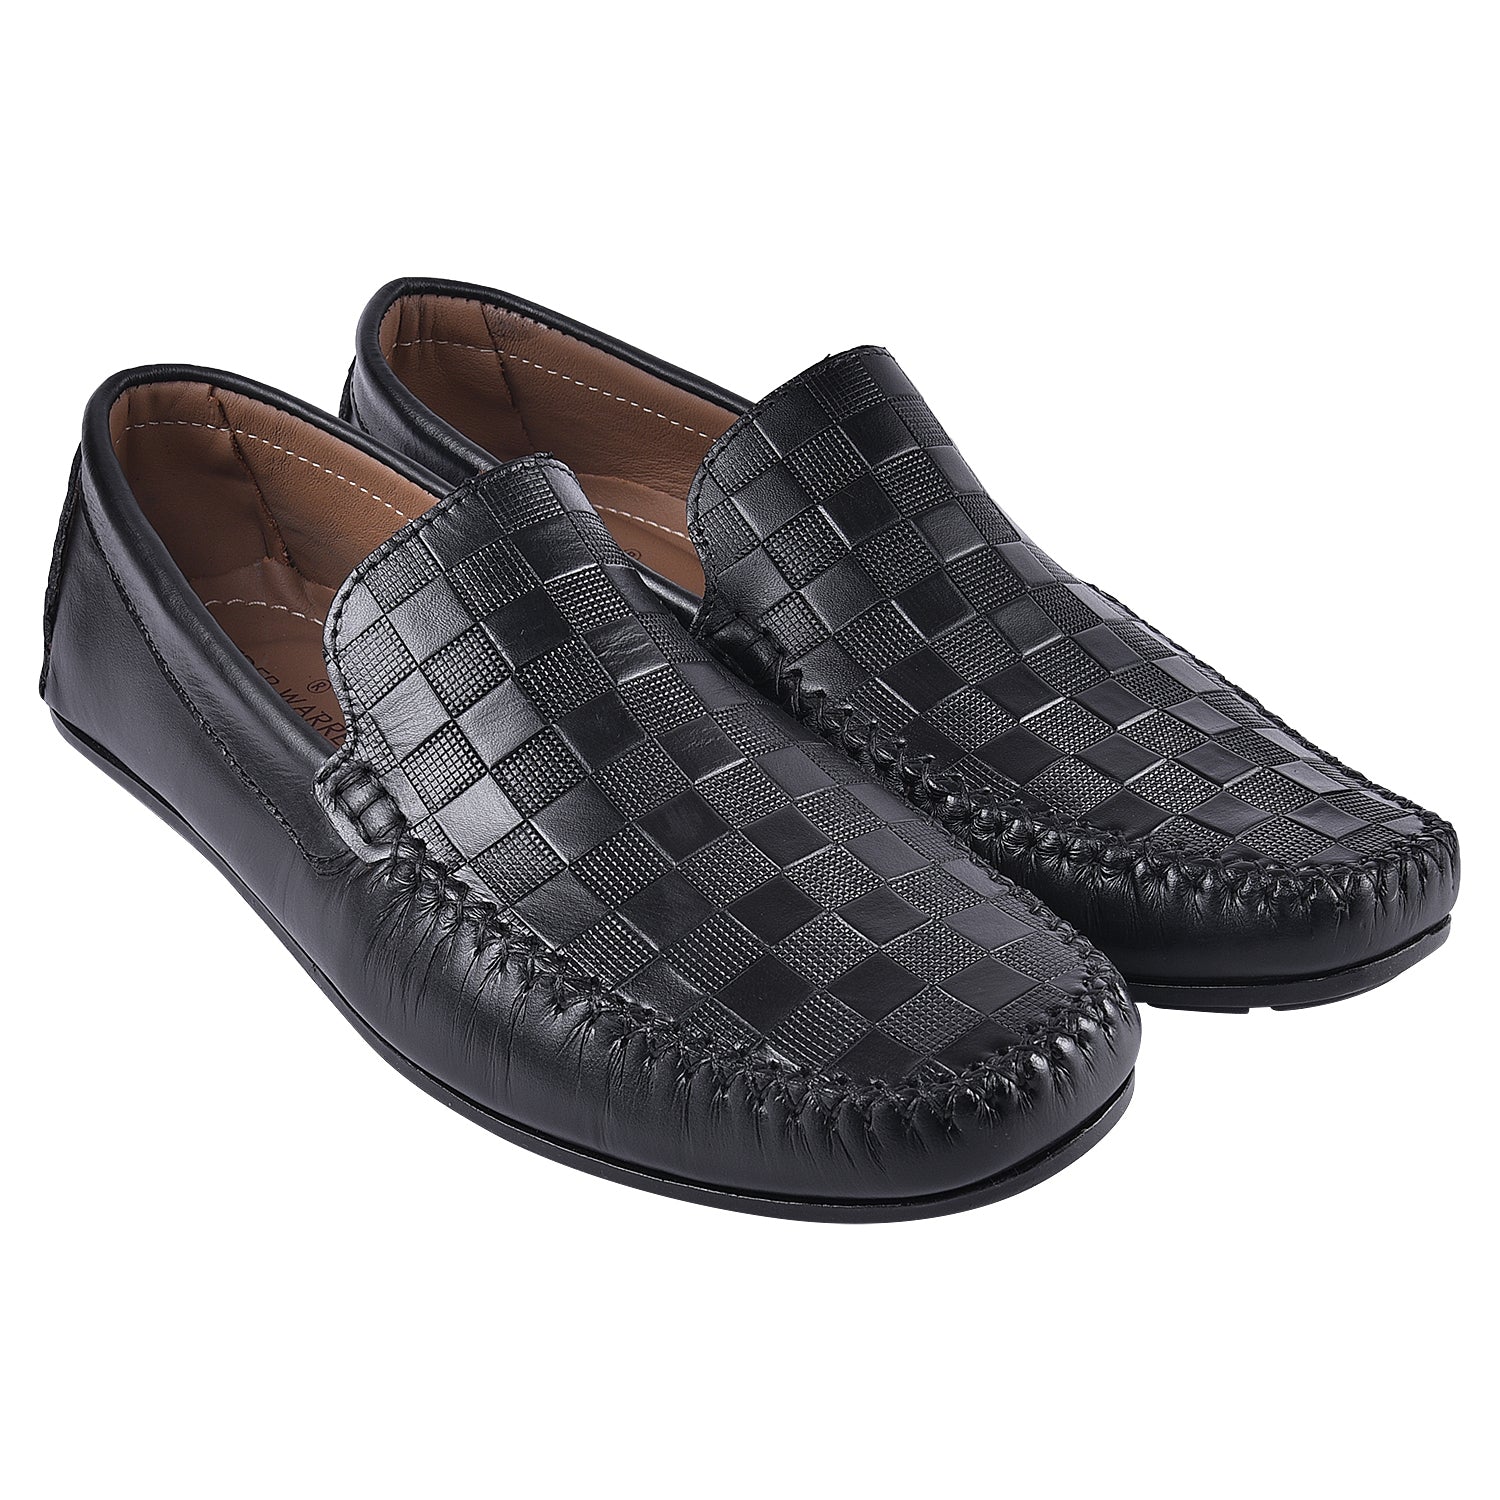 Men's Loafer checks Leather Shoes